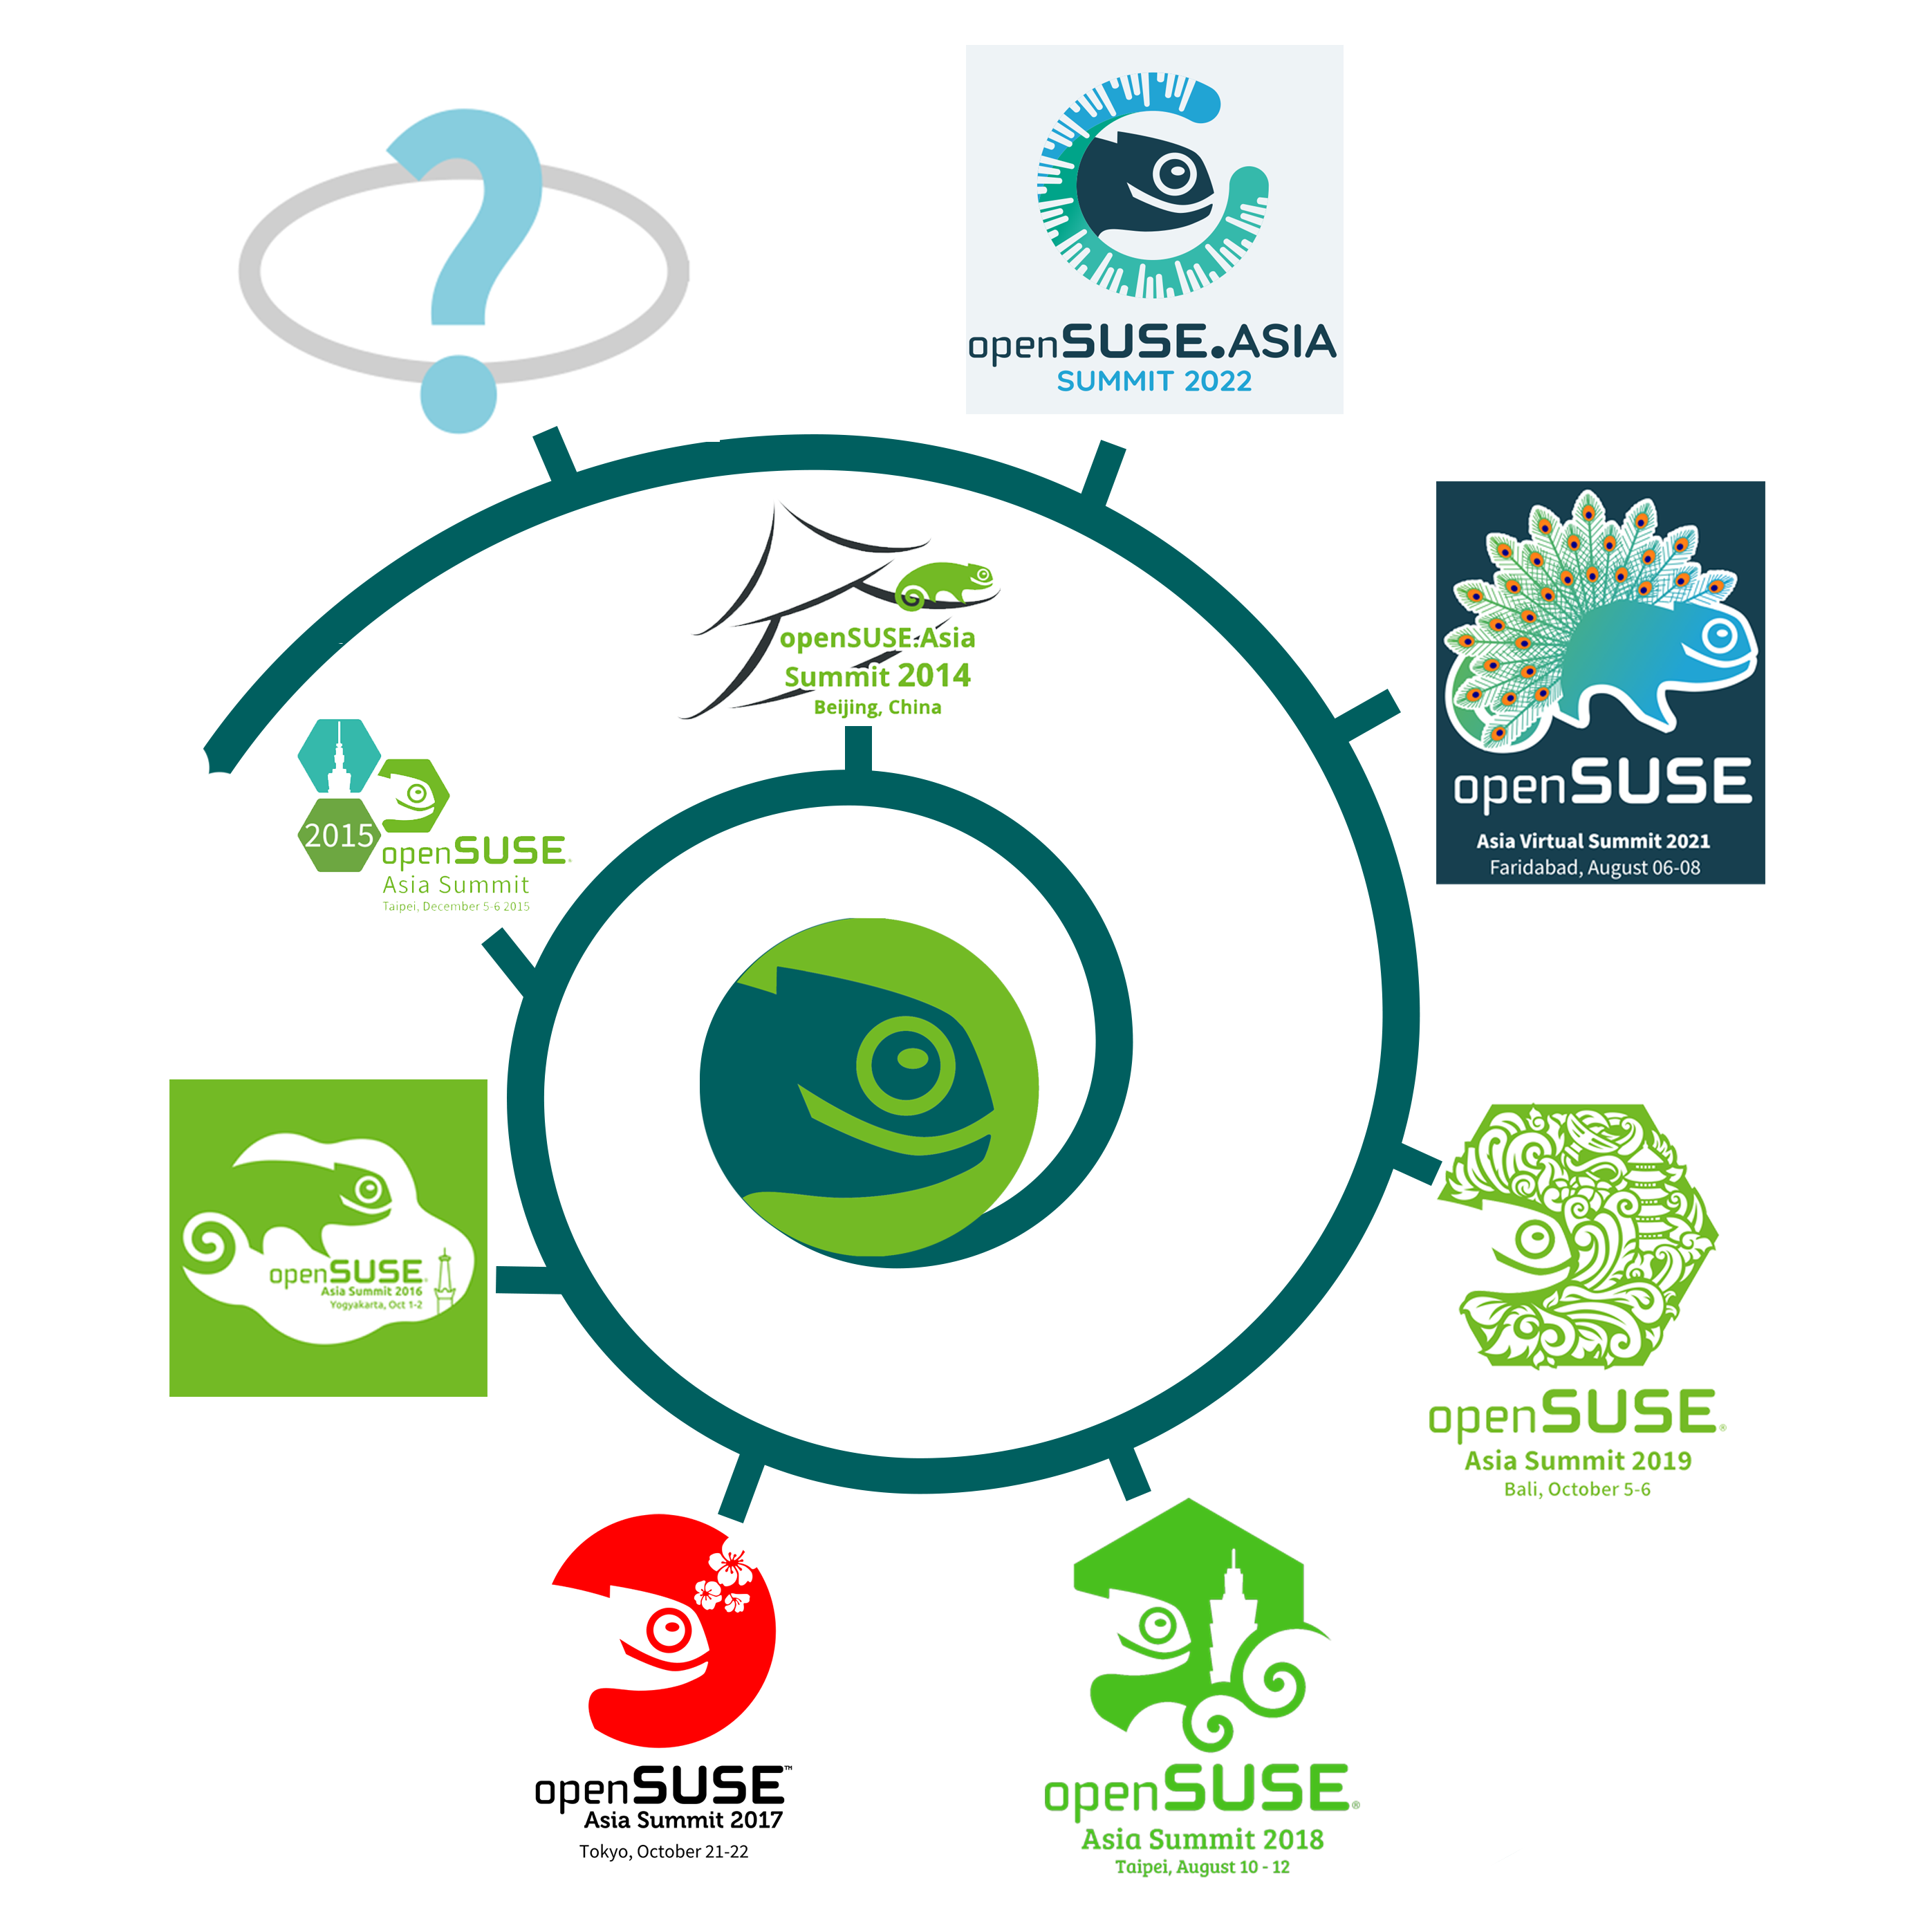 openSUSE.Asia Summit 2023 Logo Competition Announcement